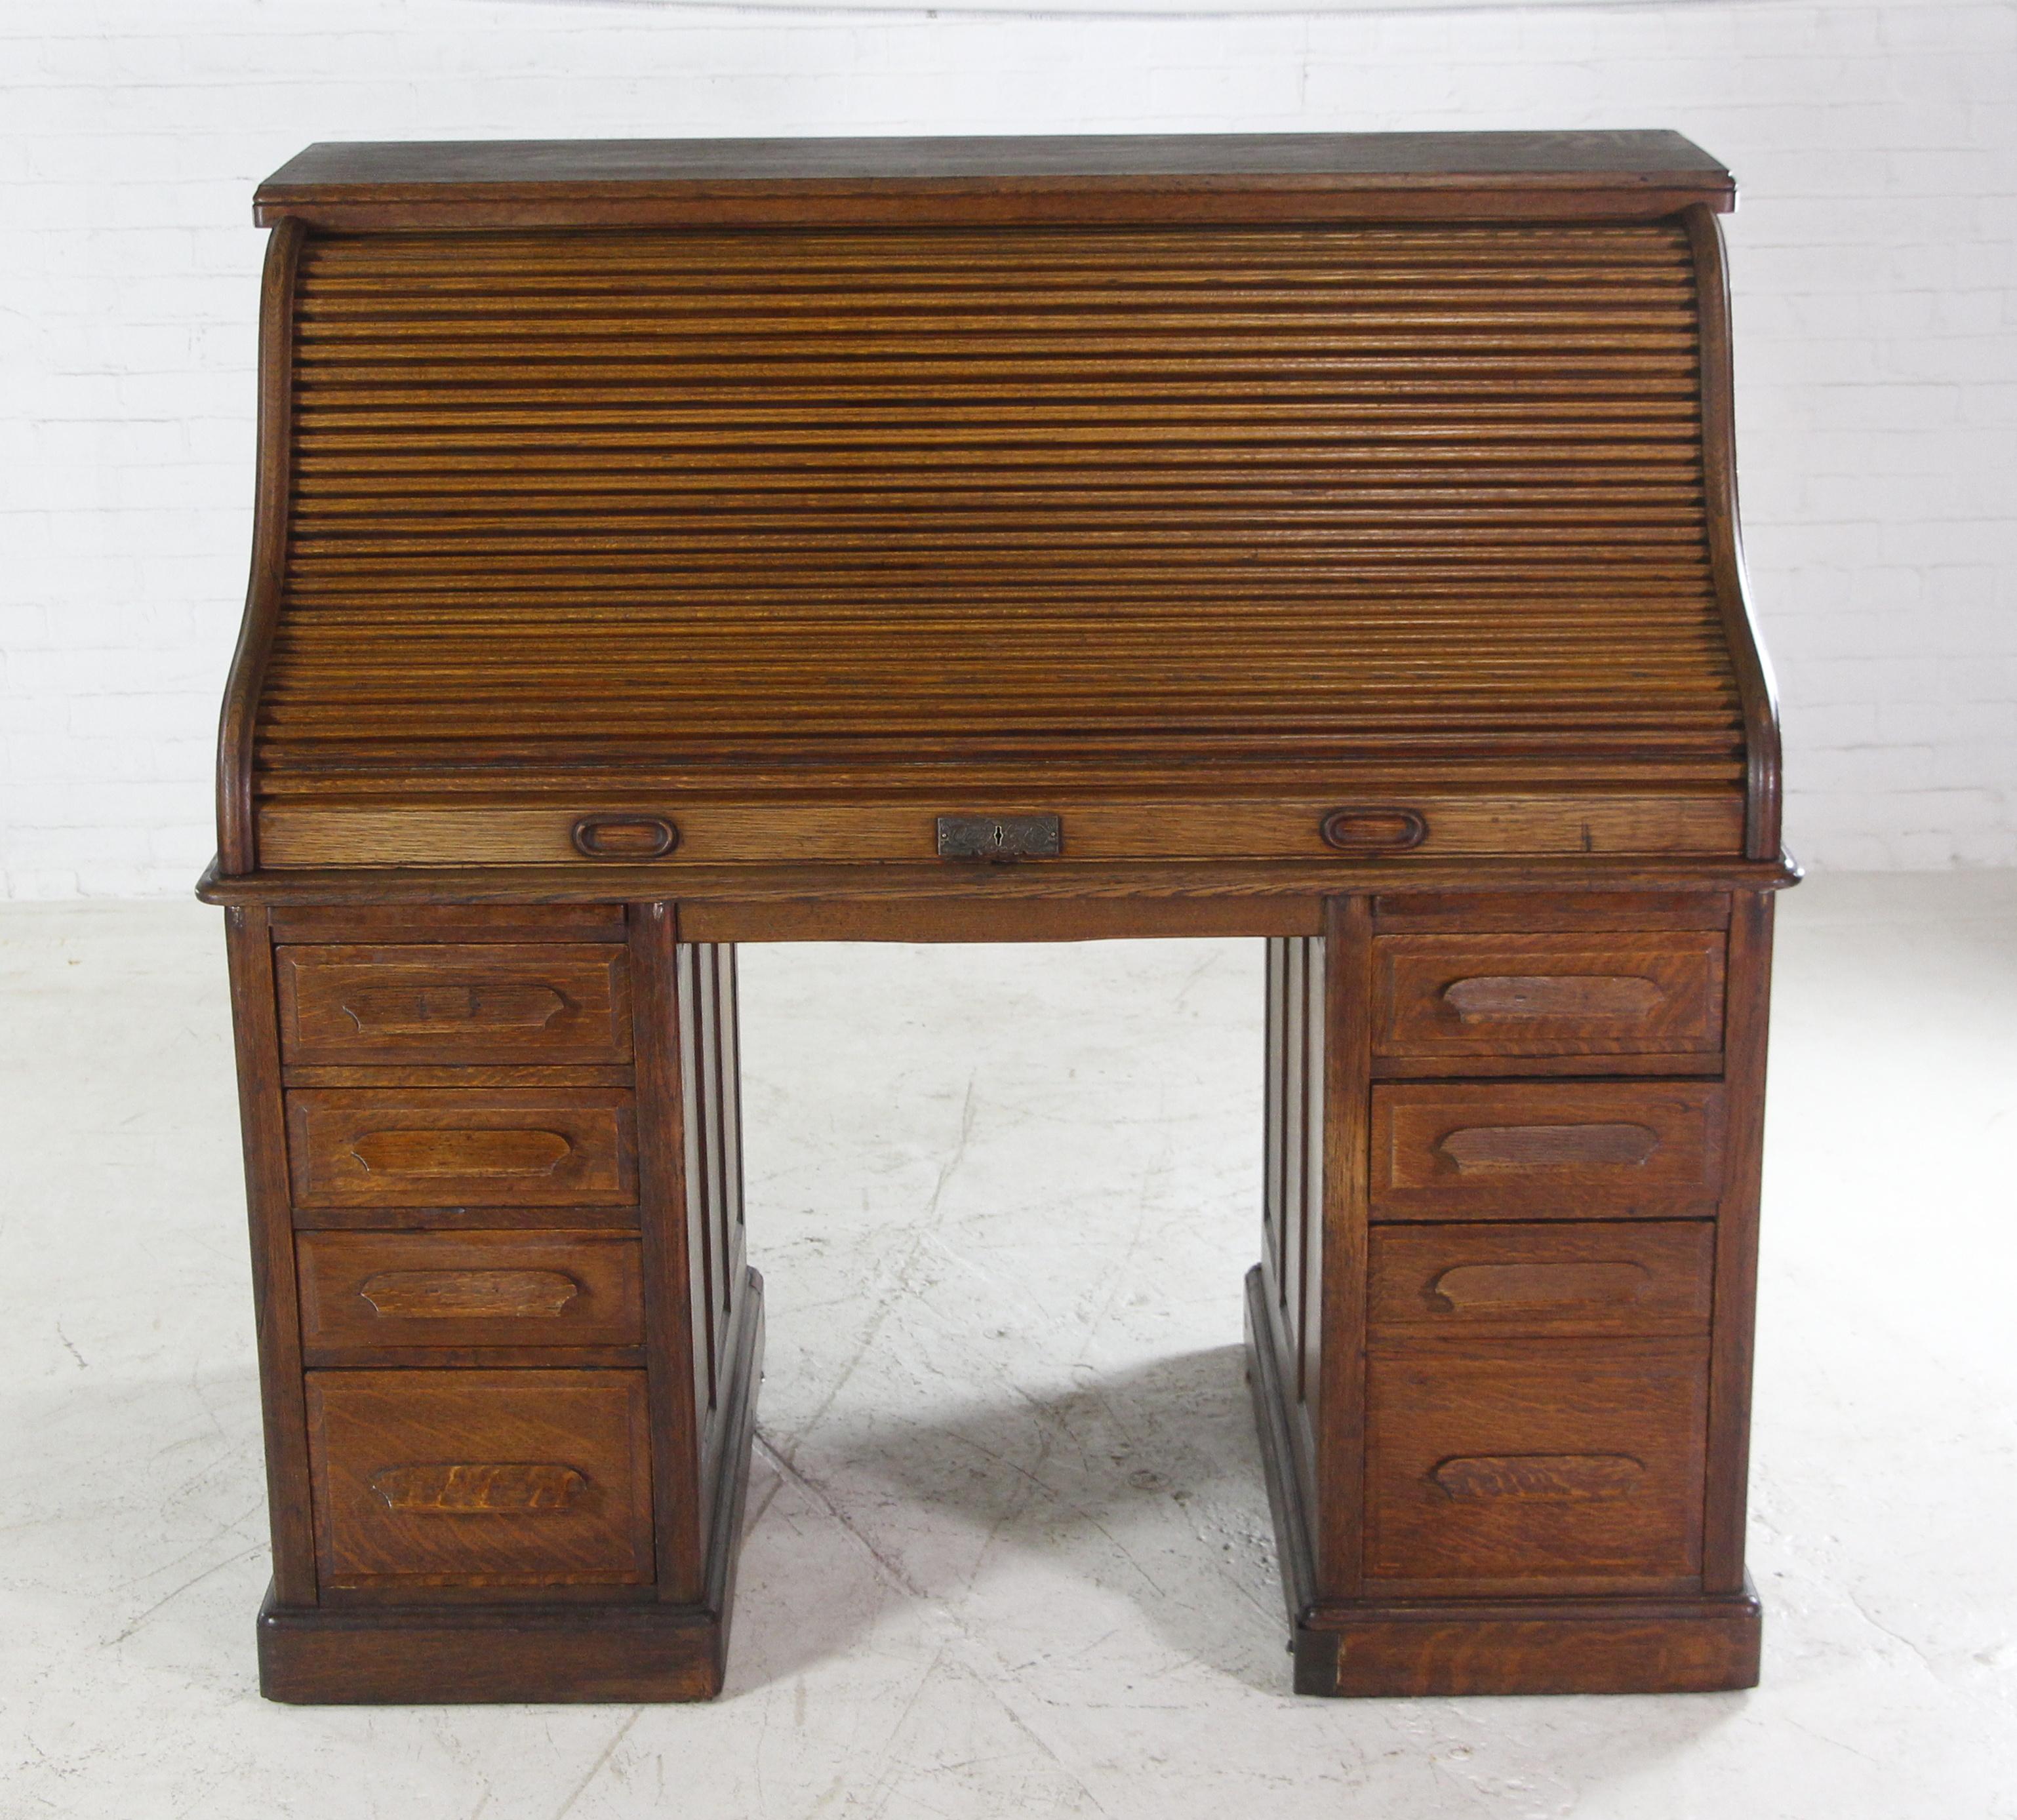 This antique oak roll top desk has paneled sides and back with a tambour slatted front. It consists of seven drawers underneath a spacious top with several pigeonhole and letter compartments. Made by Quigley Co. This can be seen at our 2420 Broadway